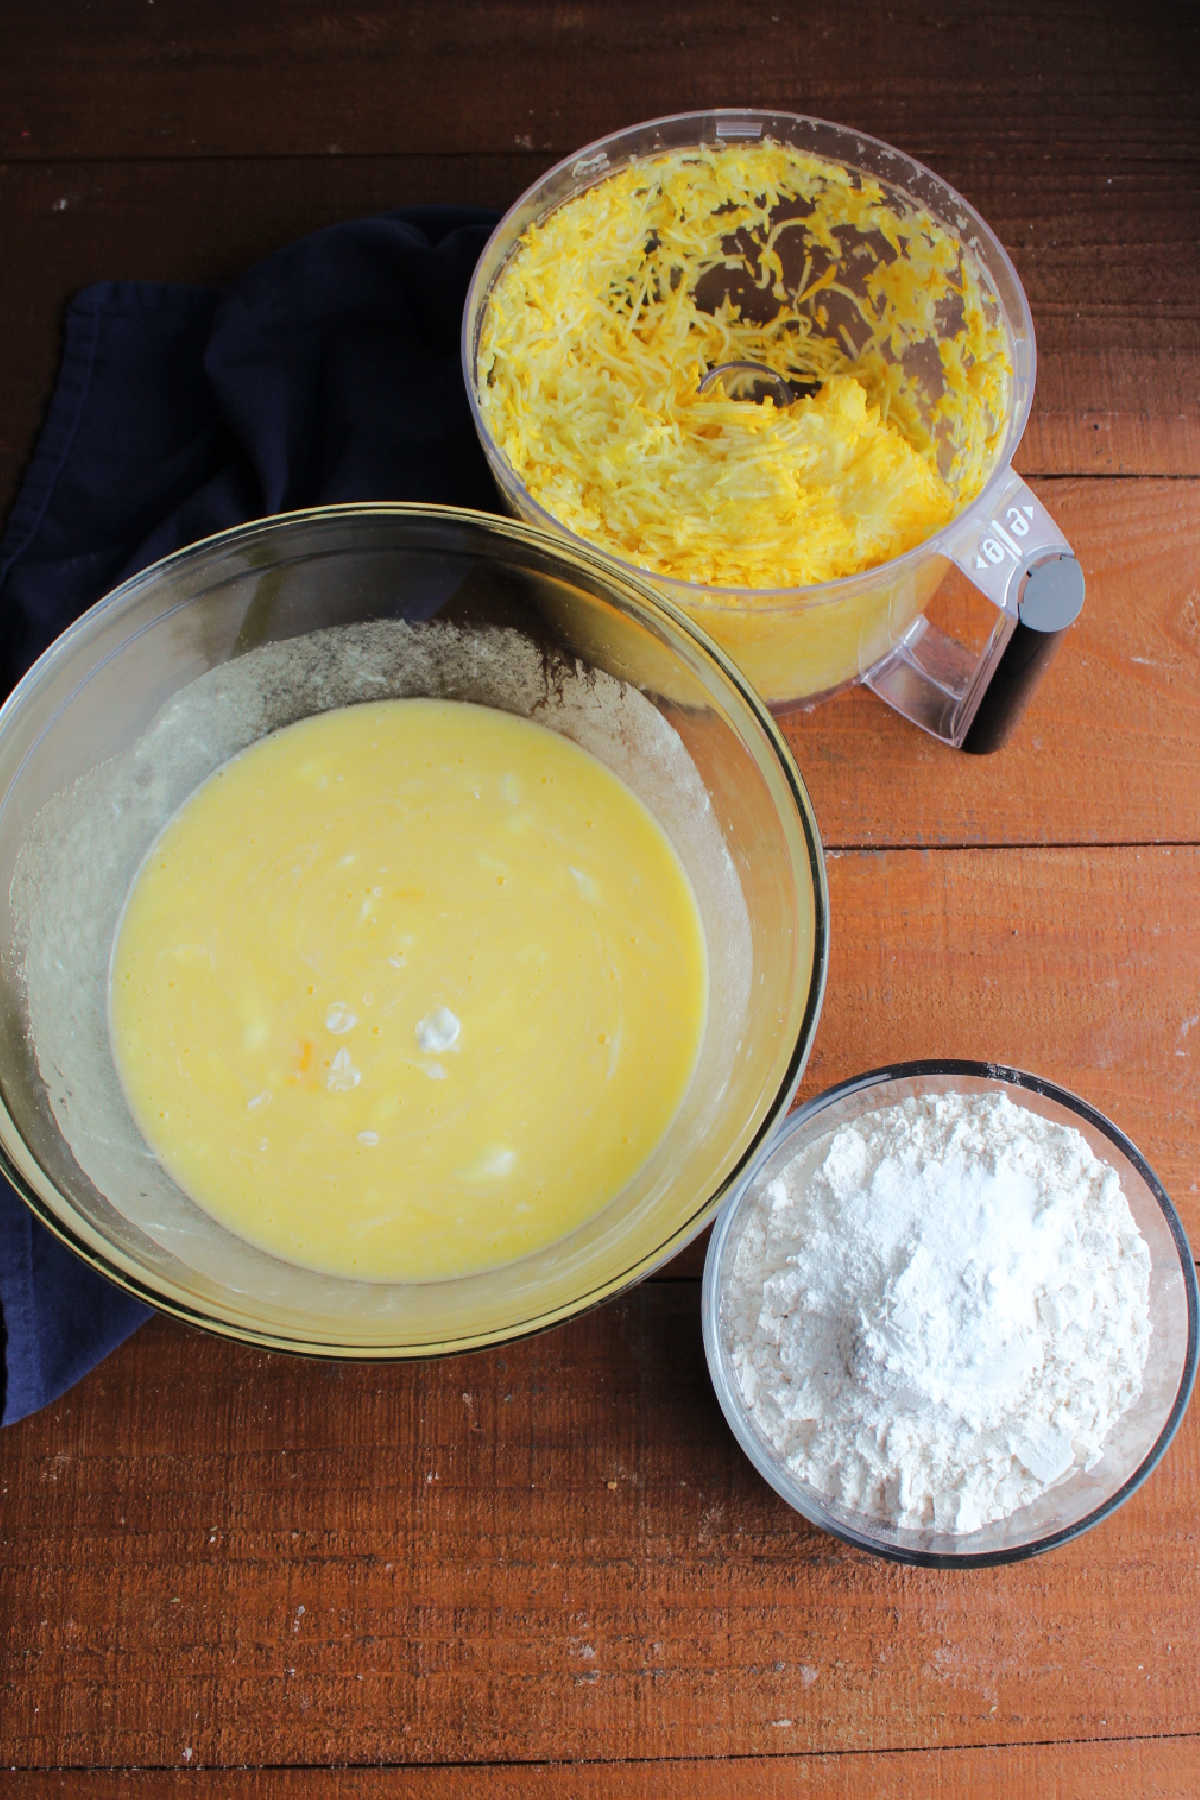 Bowl of dry ingredients, next to mixing bowl of wet ingredients, with a food processor filled with shredded yellow squash nearby.